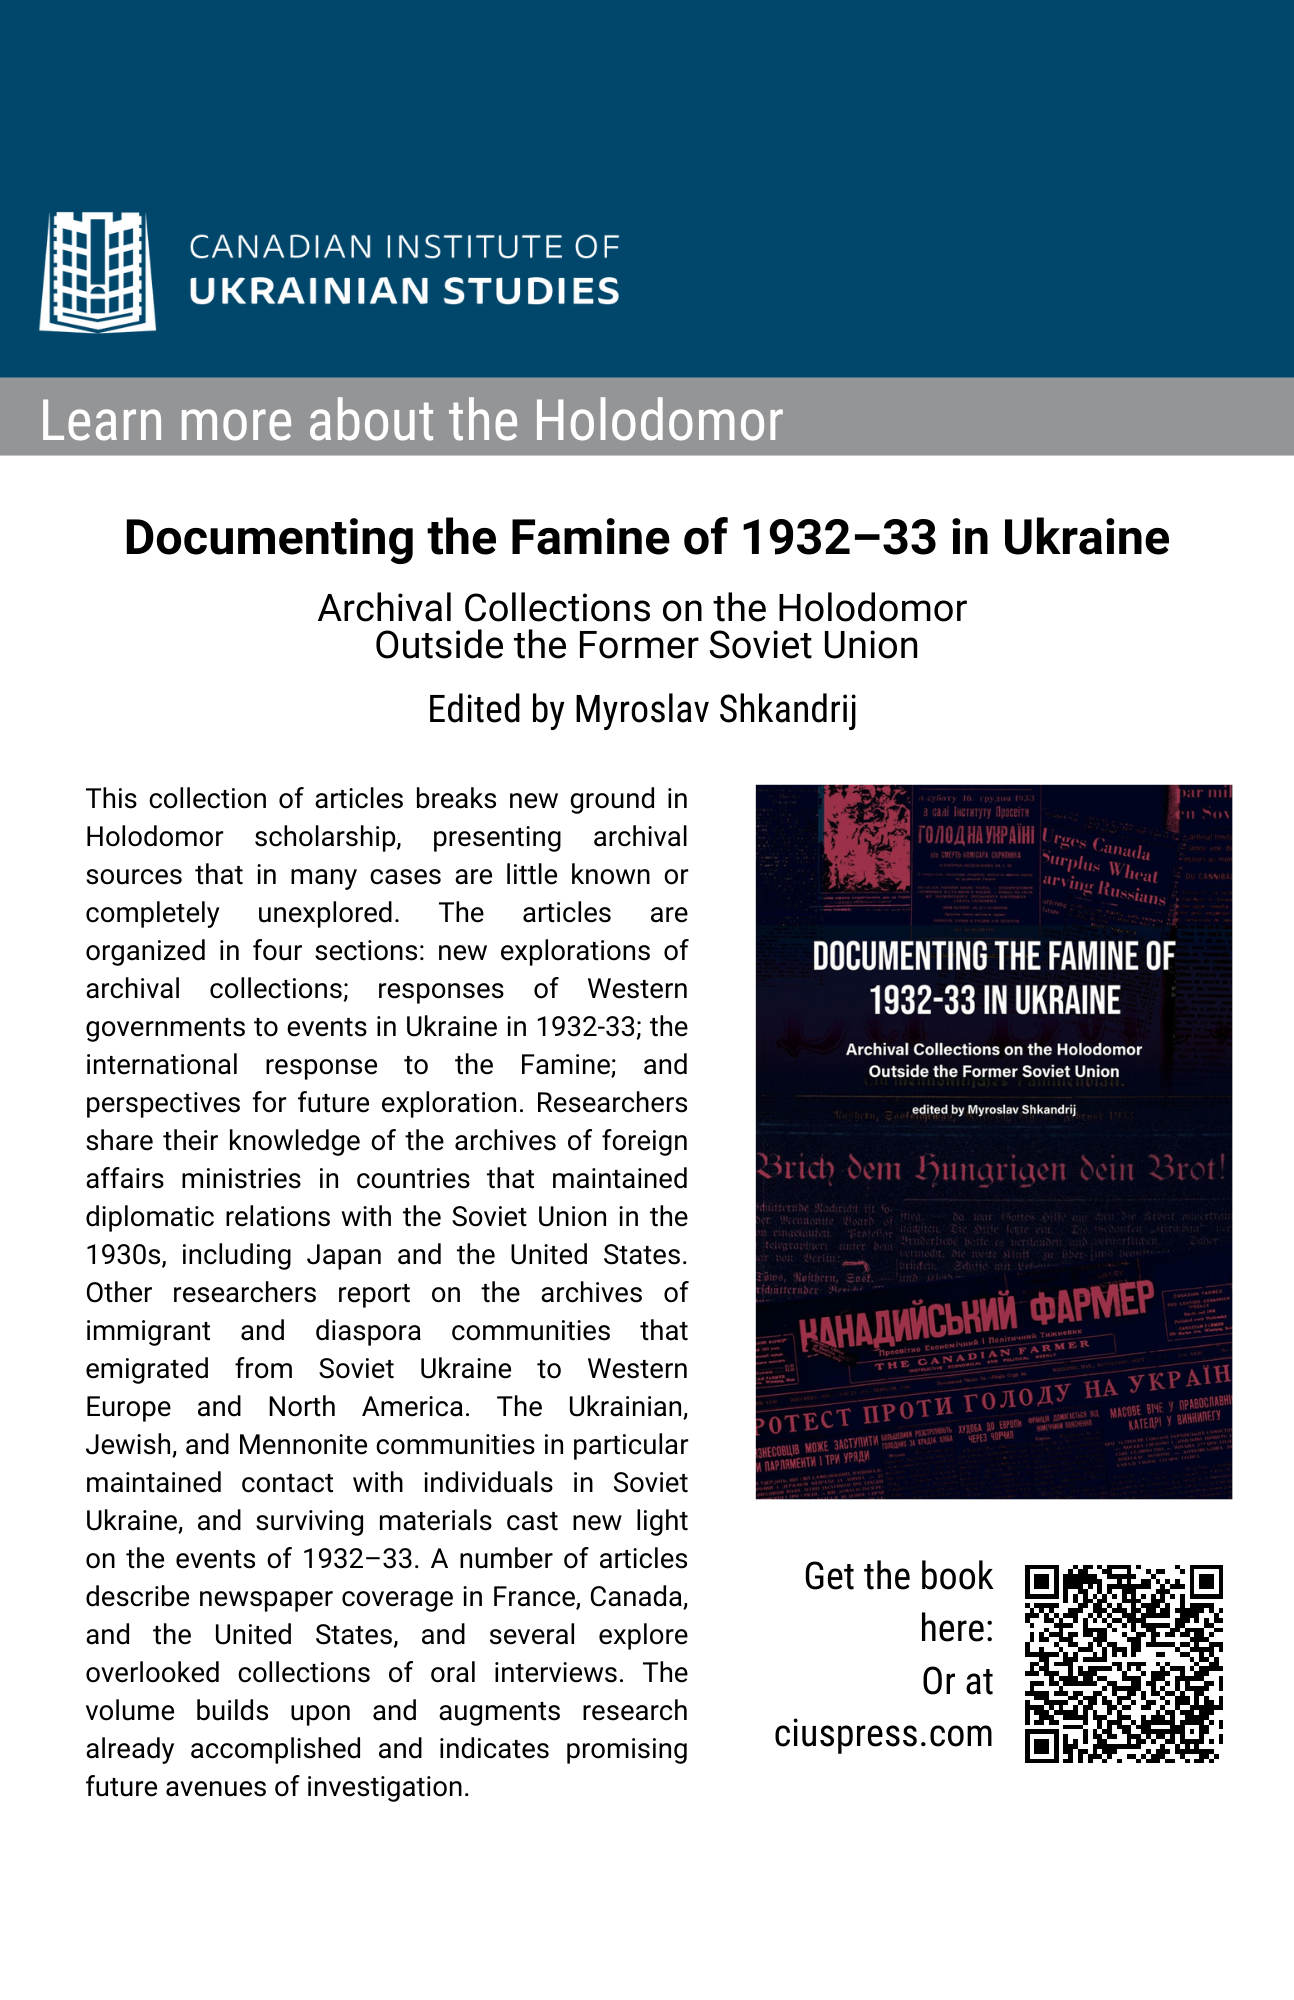 holodomor-reading1.png